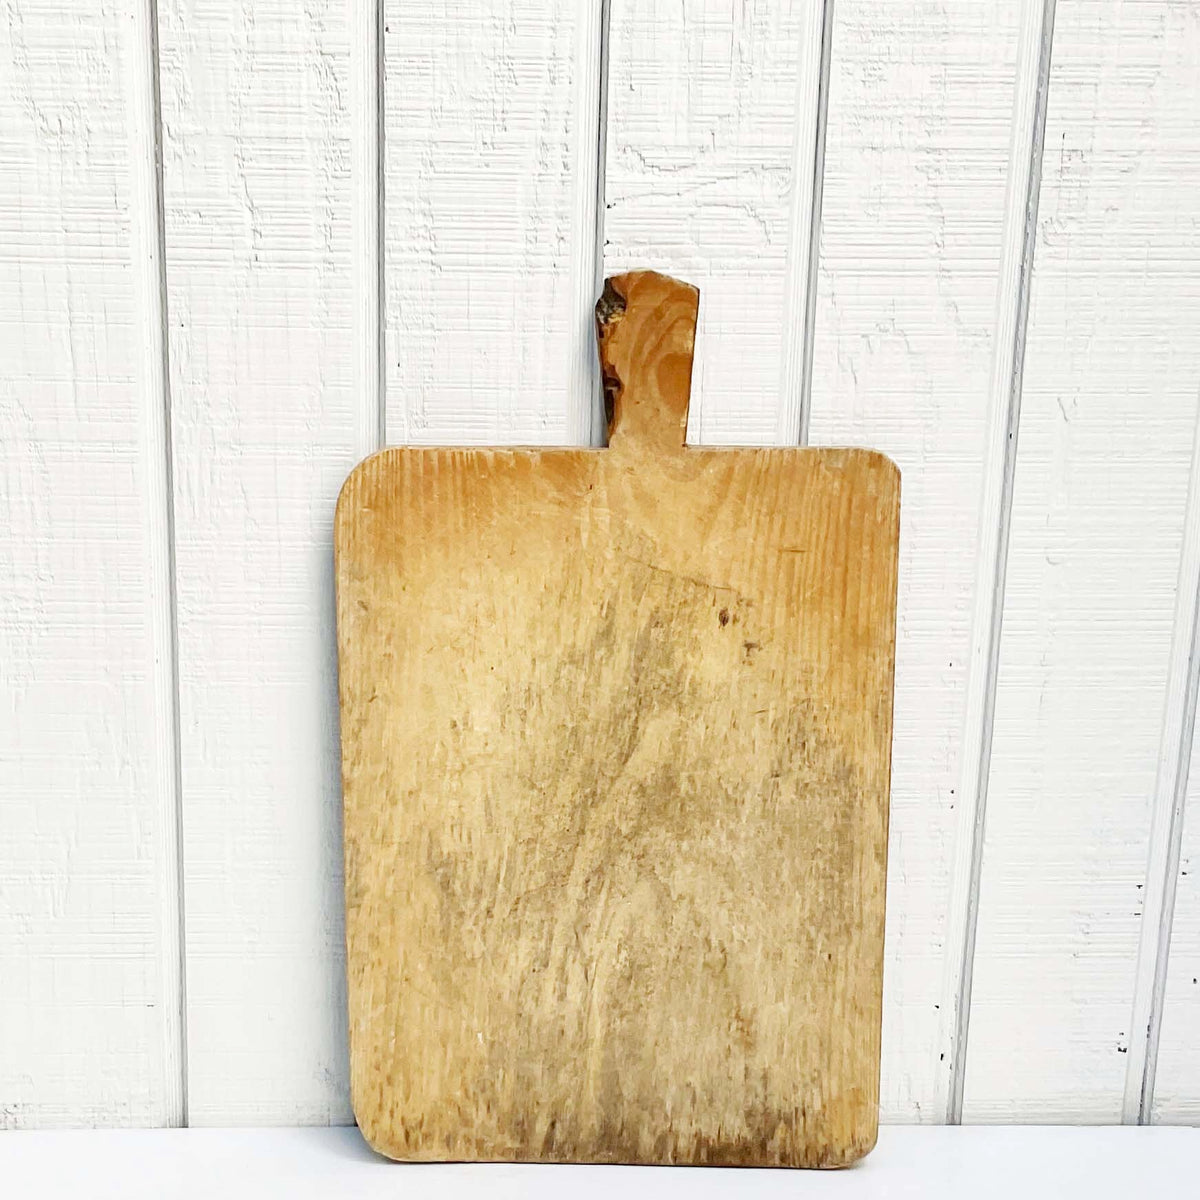 Antique Bread Boards ~ Giveaway of the Month!